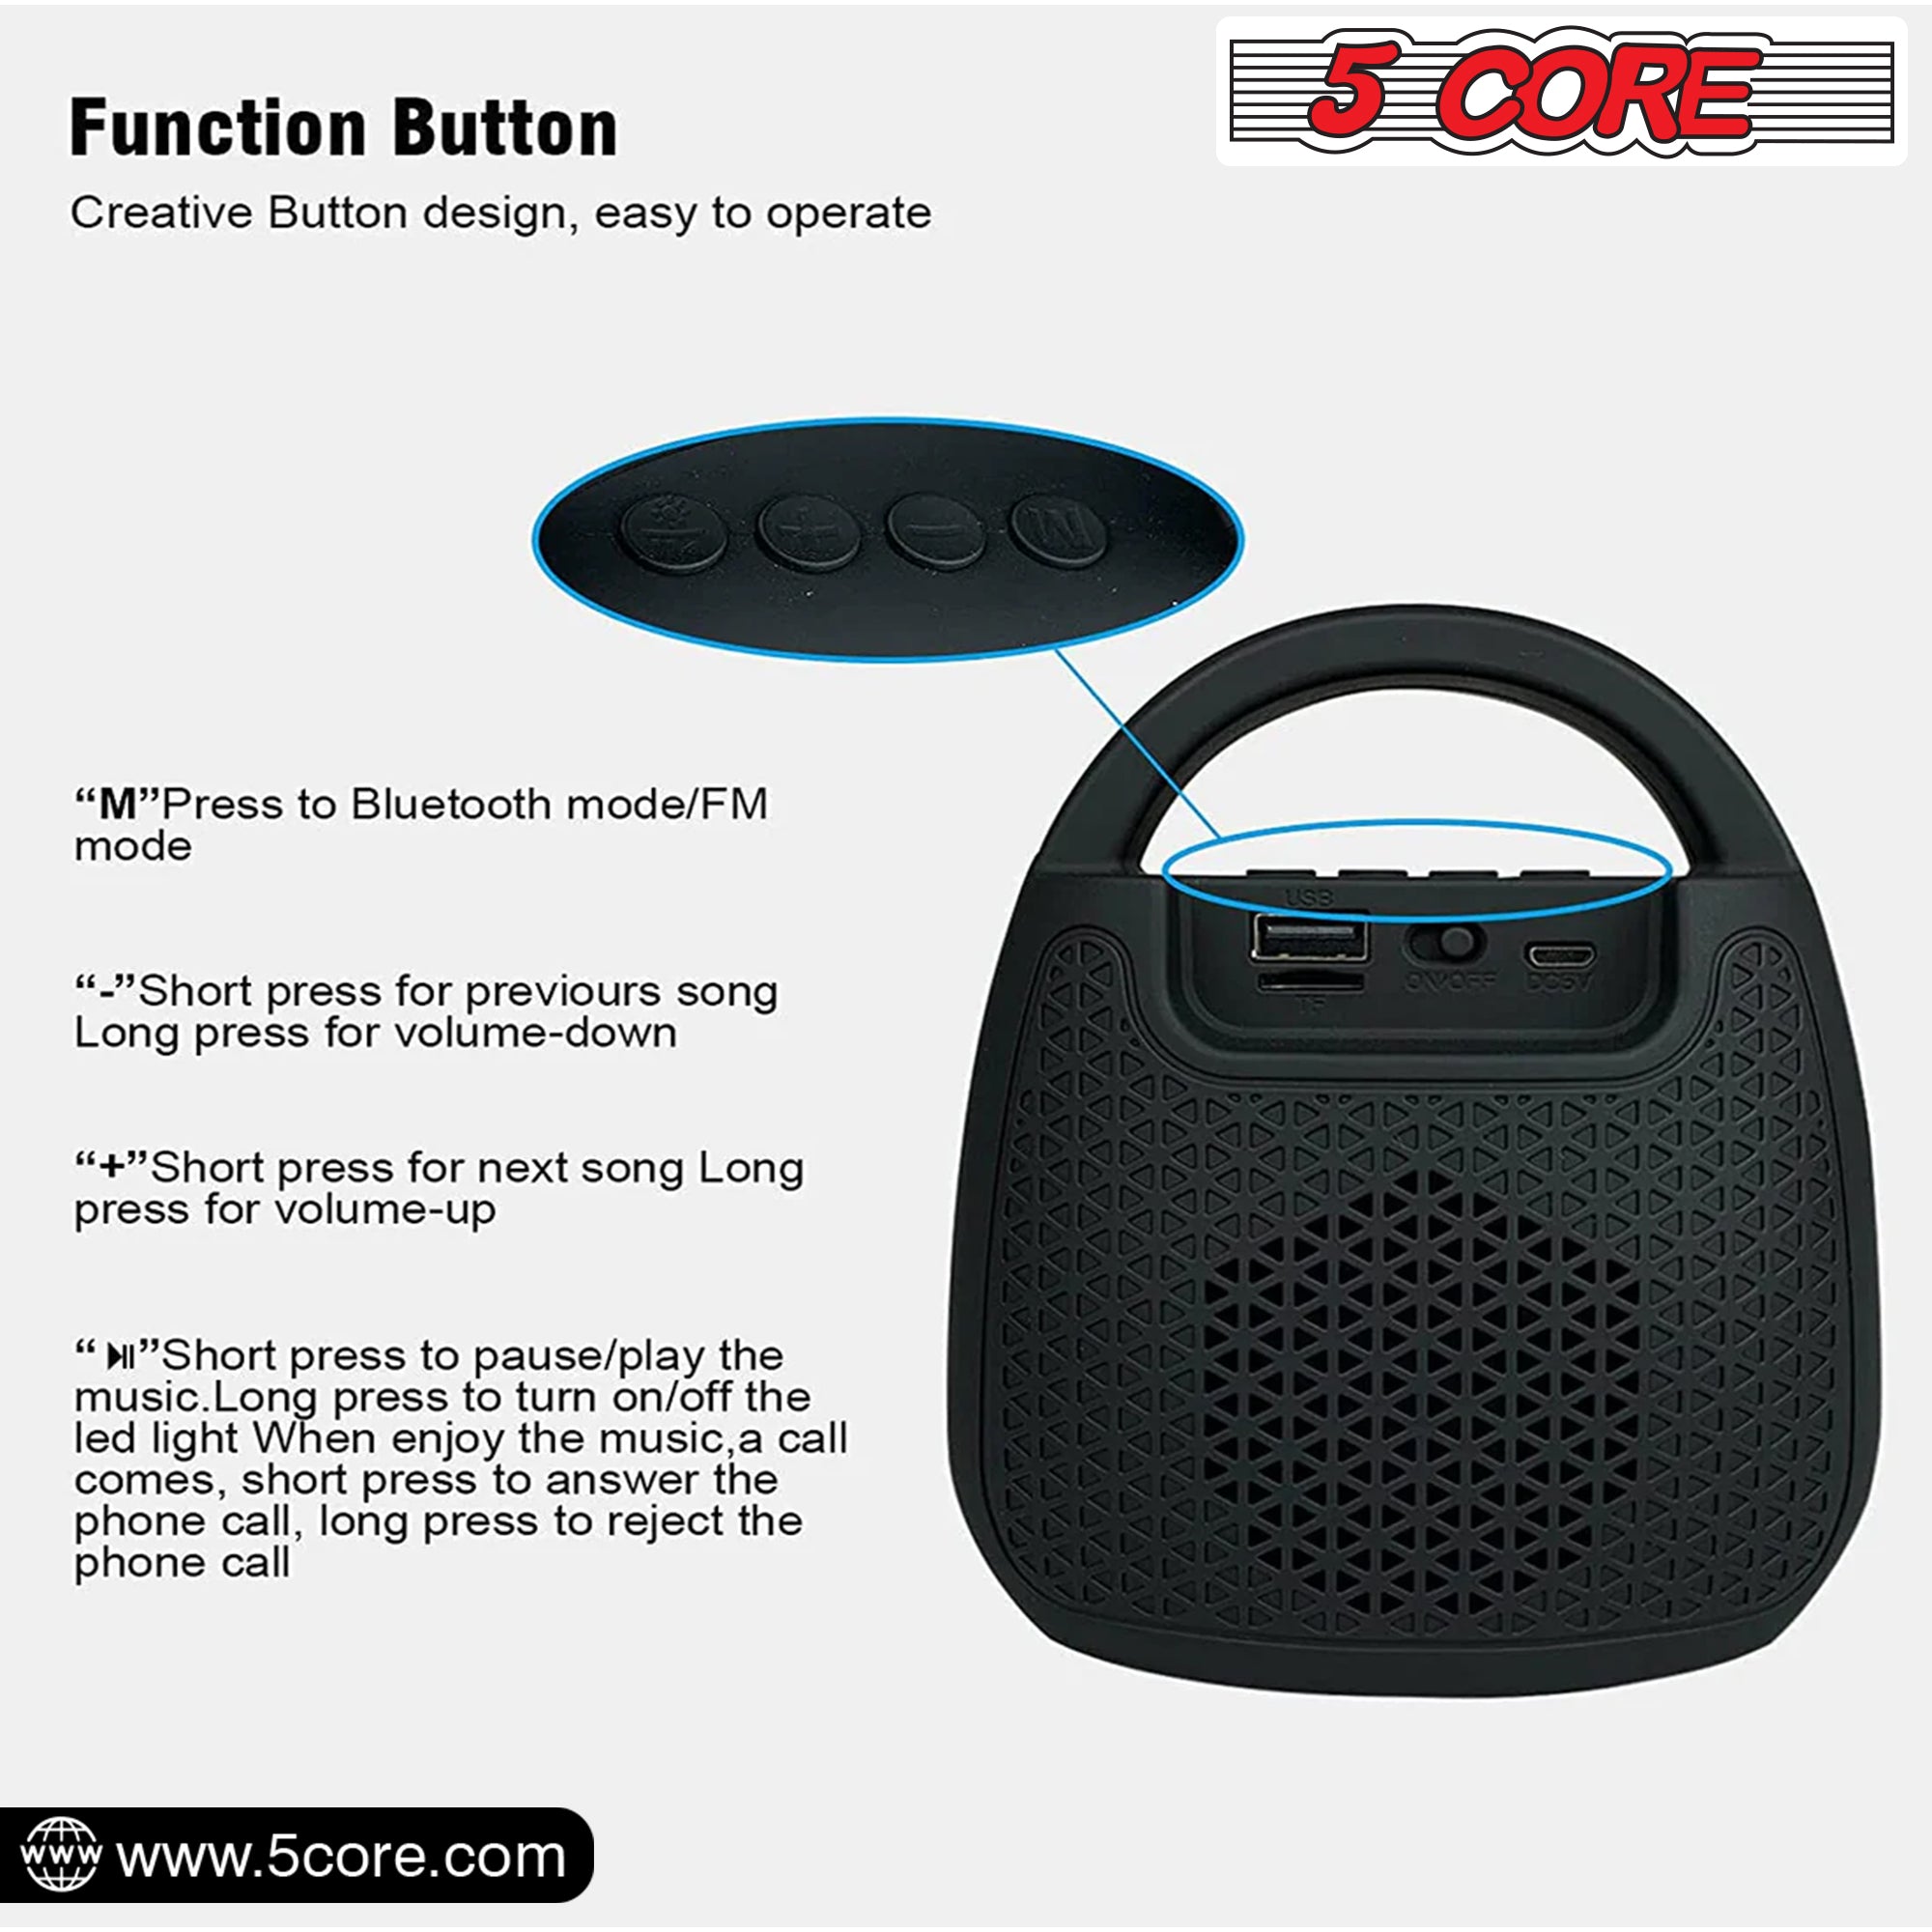 Function button